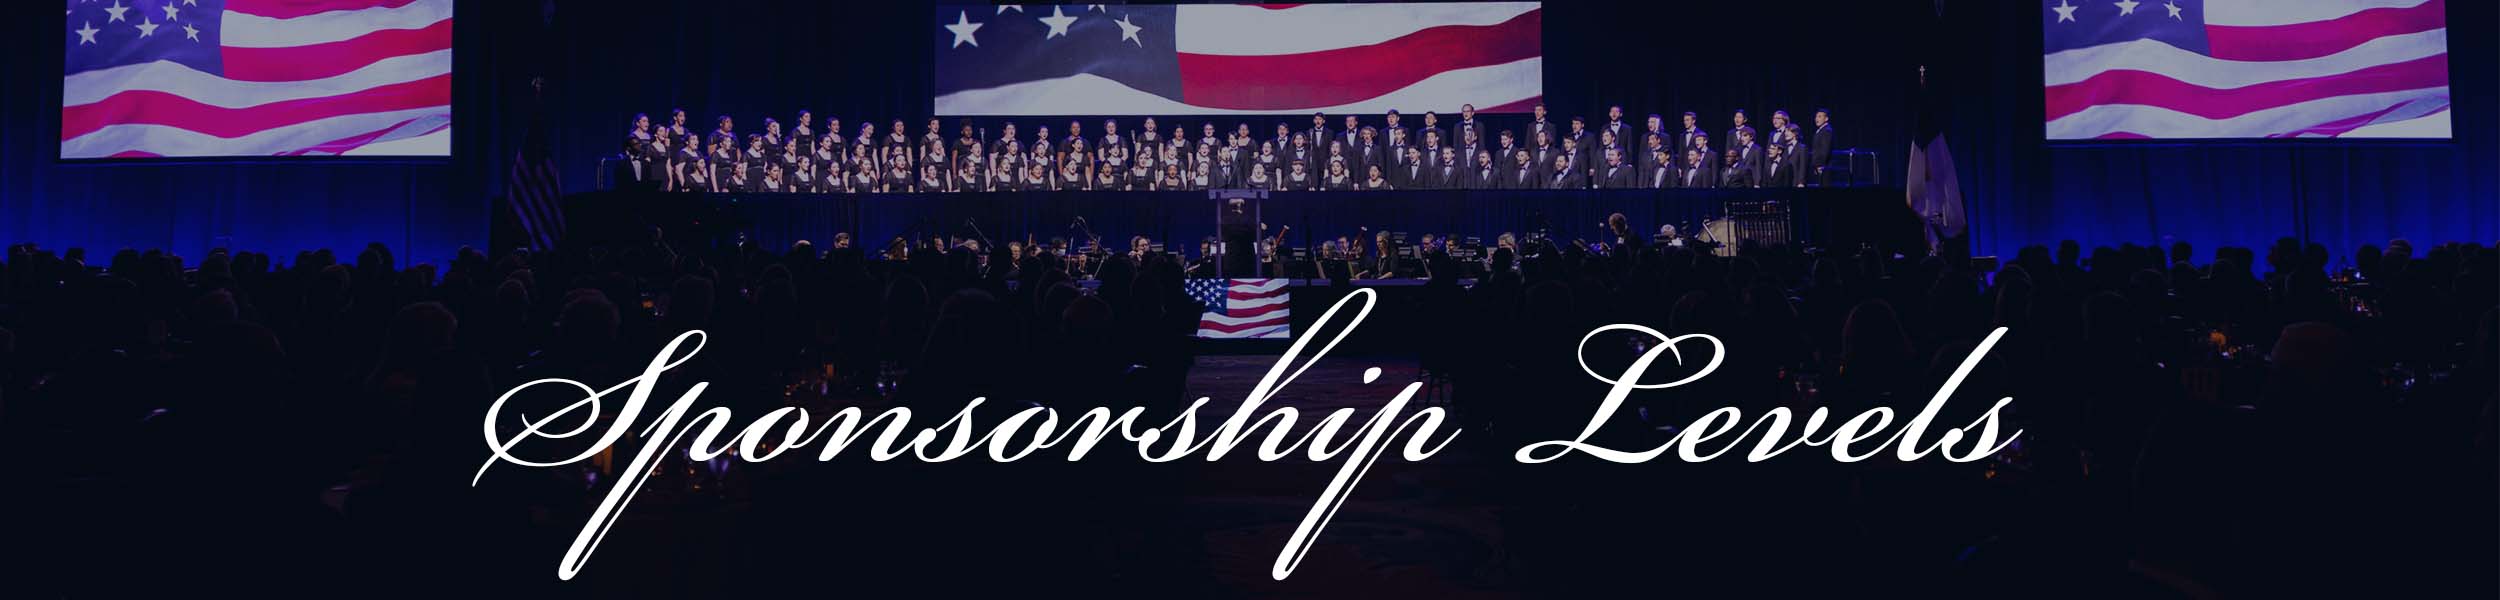 Choir singing and American flags in the background with title "Sponsorship Levels" over the picture